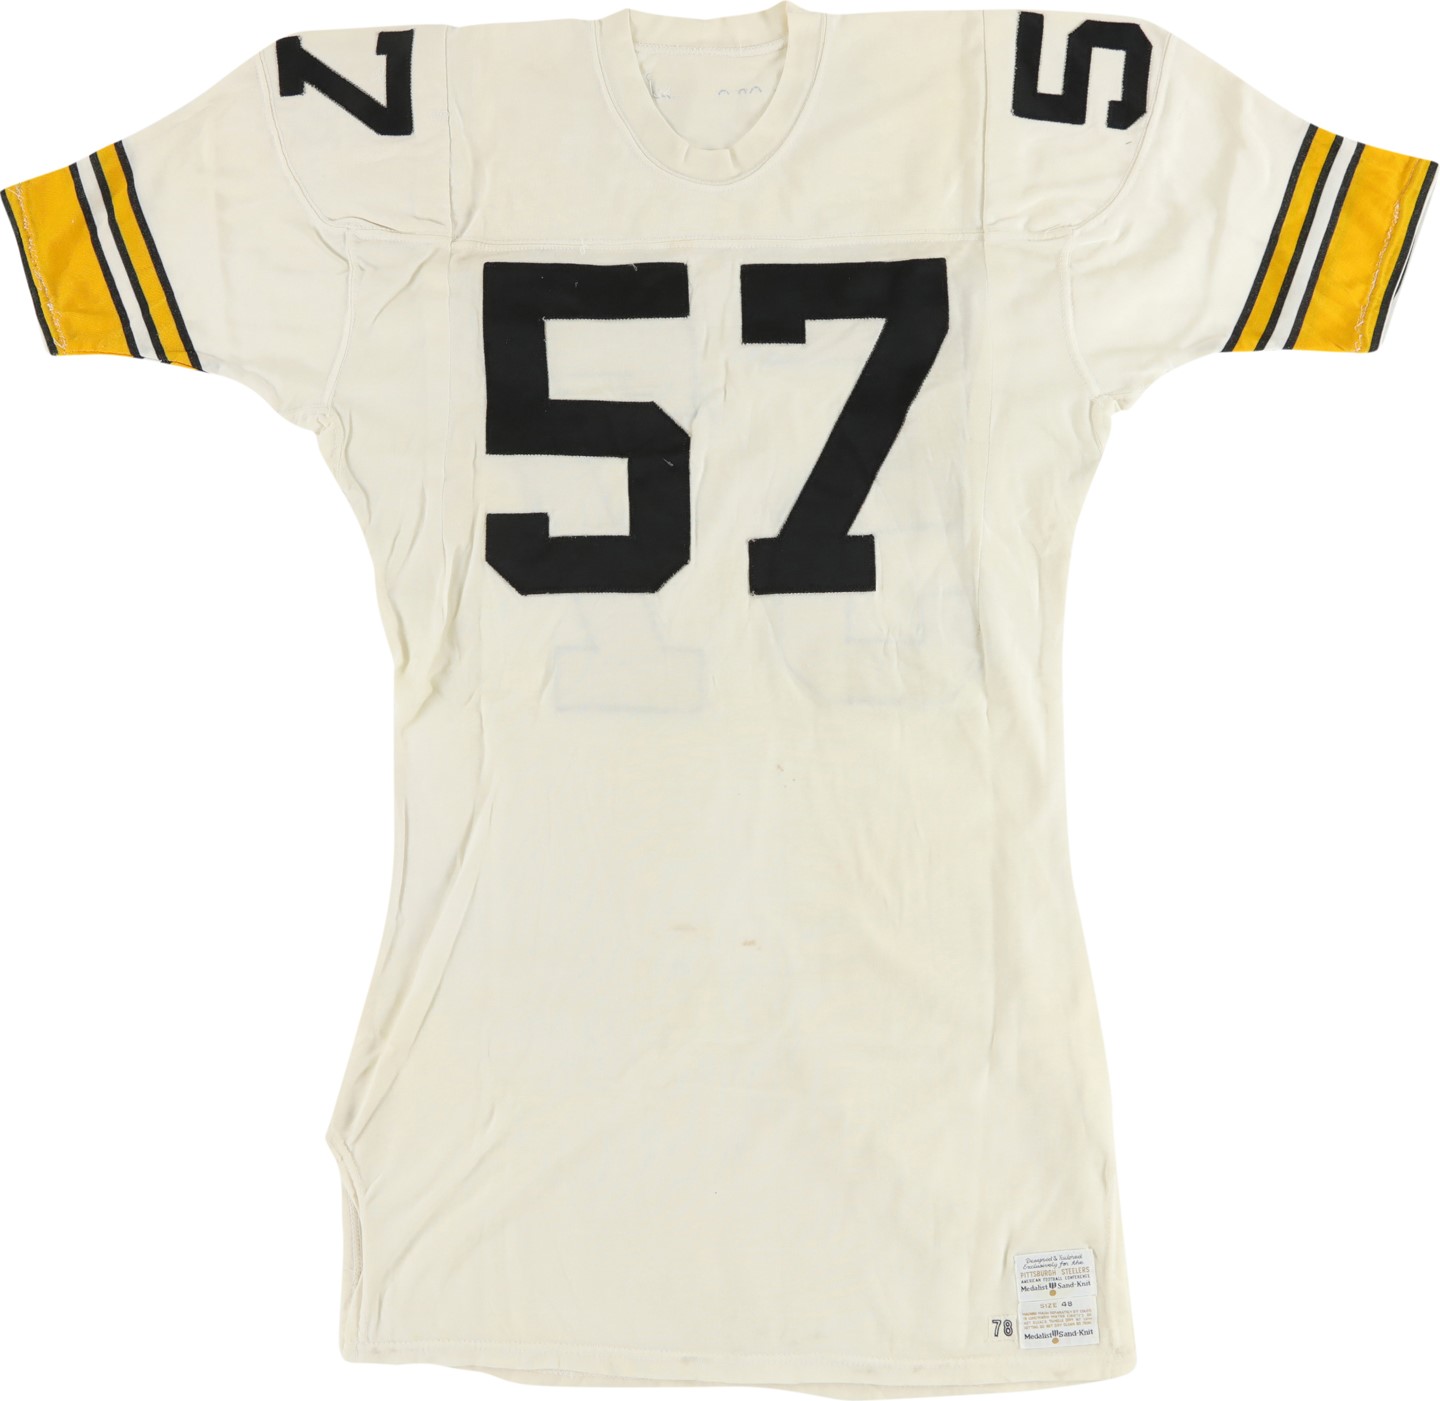 The Pittsburgh Steelers Game Worn Jersey Archive - 1978 Sam Davis Pittsburgh Steelers Game Worn Jersey